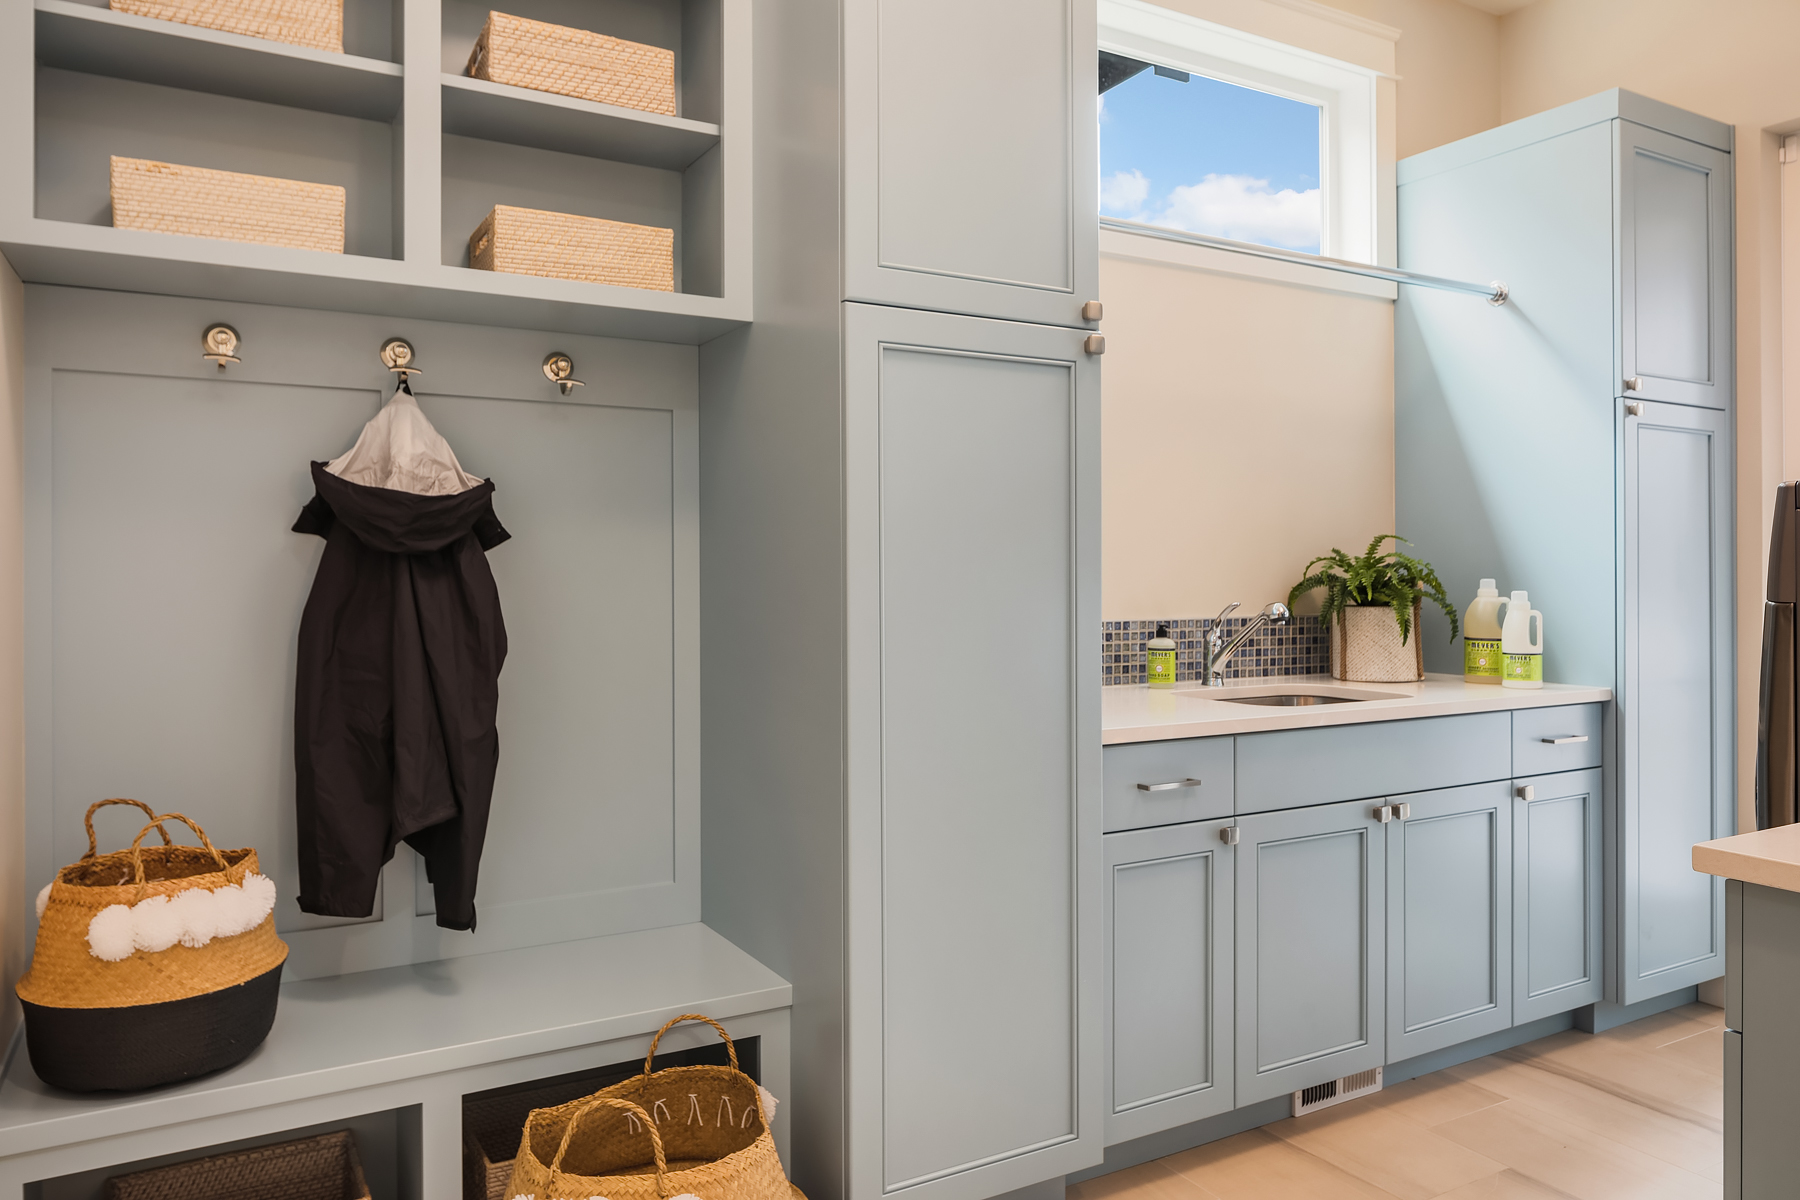 How to make laundry day a joyful experience with these 7 interior design tips!